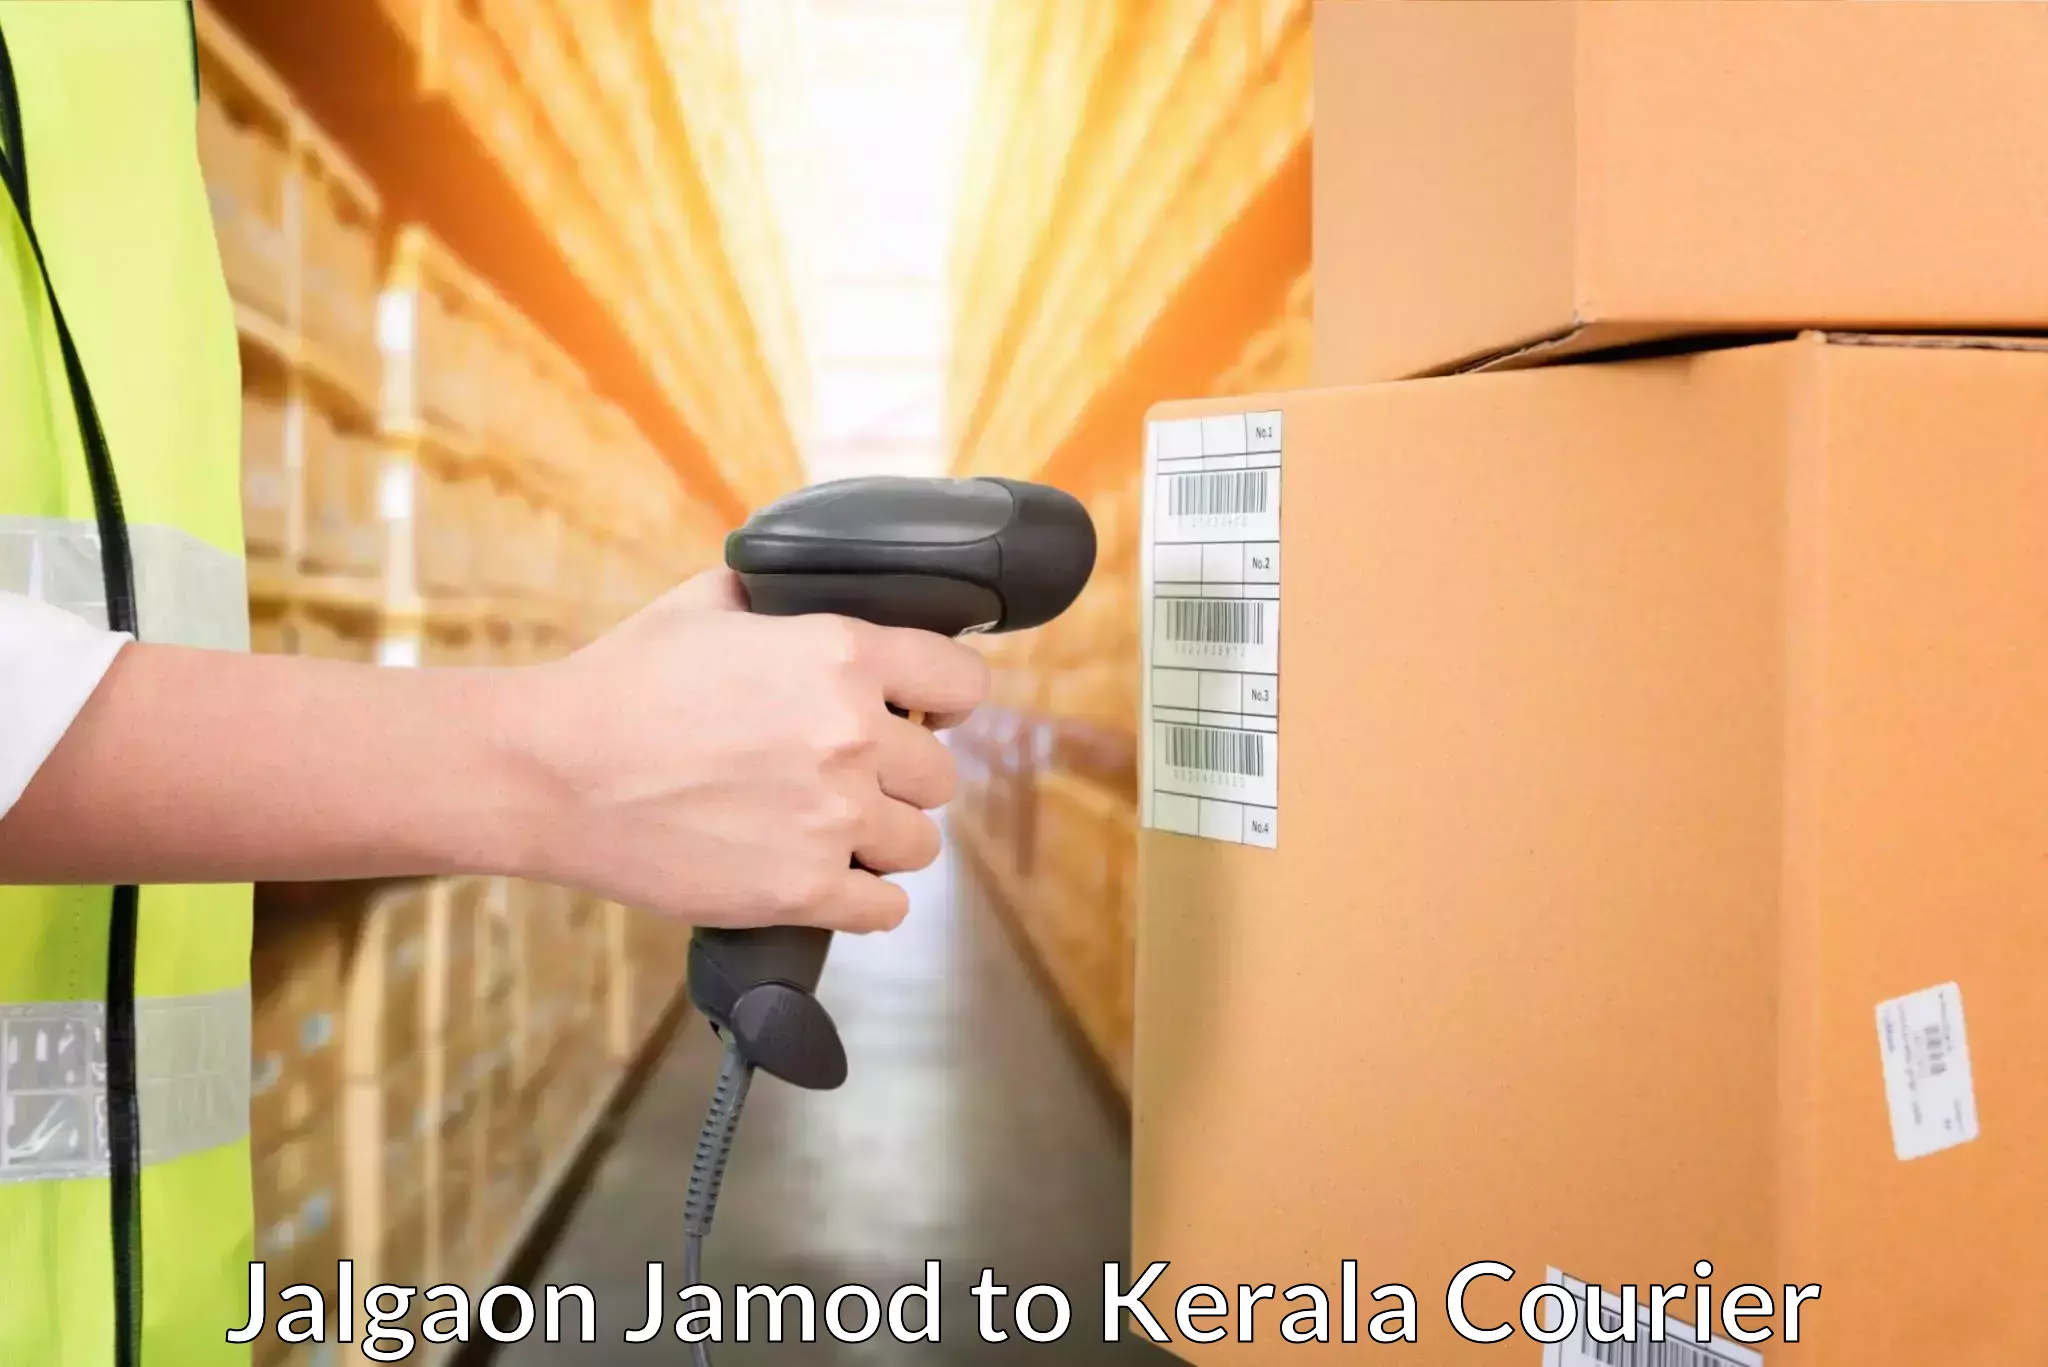 Residential courier service in Jalgaon Jamod to Kerala